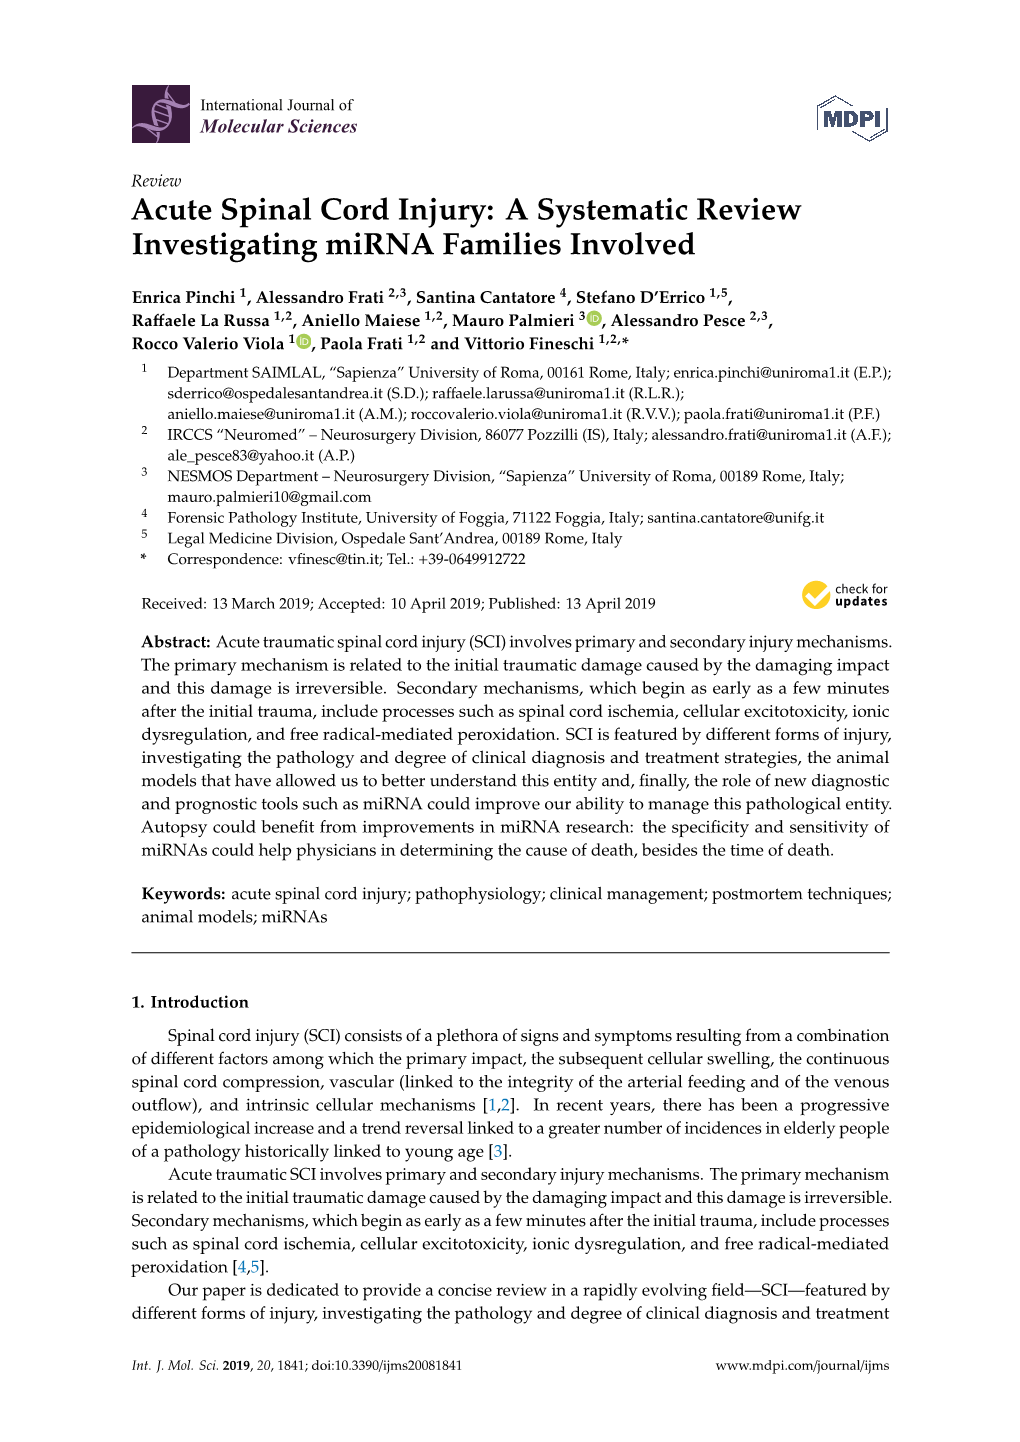 Acute Spinal Cord Injury: a Systematic Review Investigating Mirna Families Involved